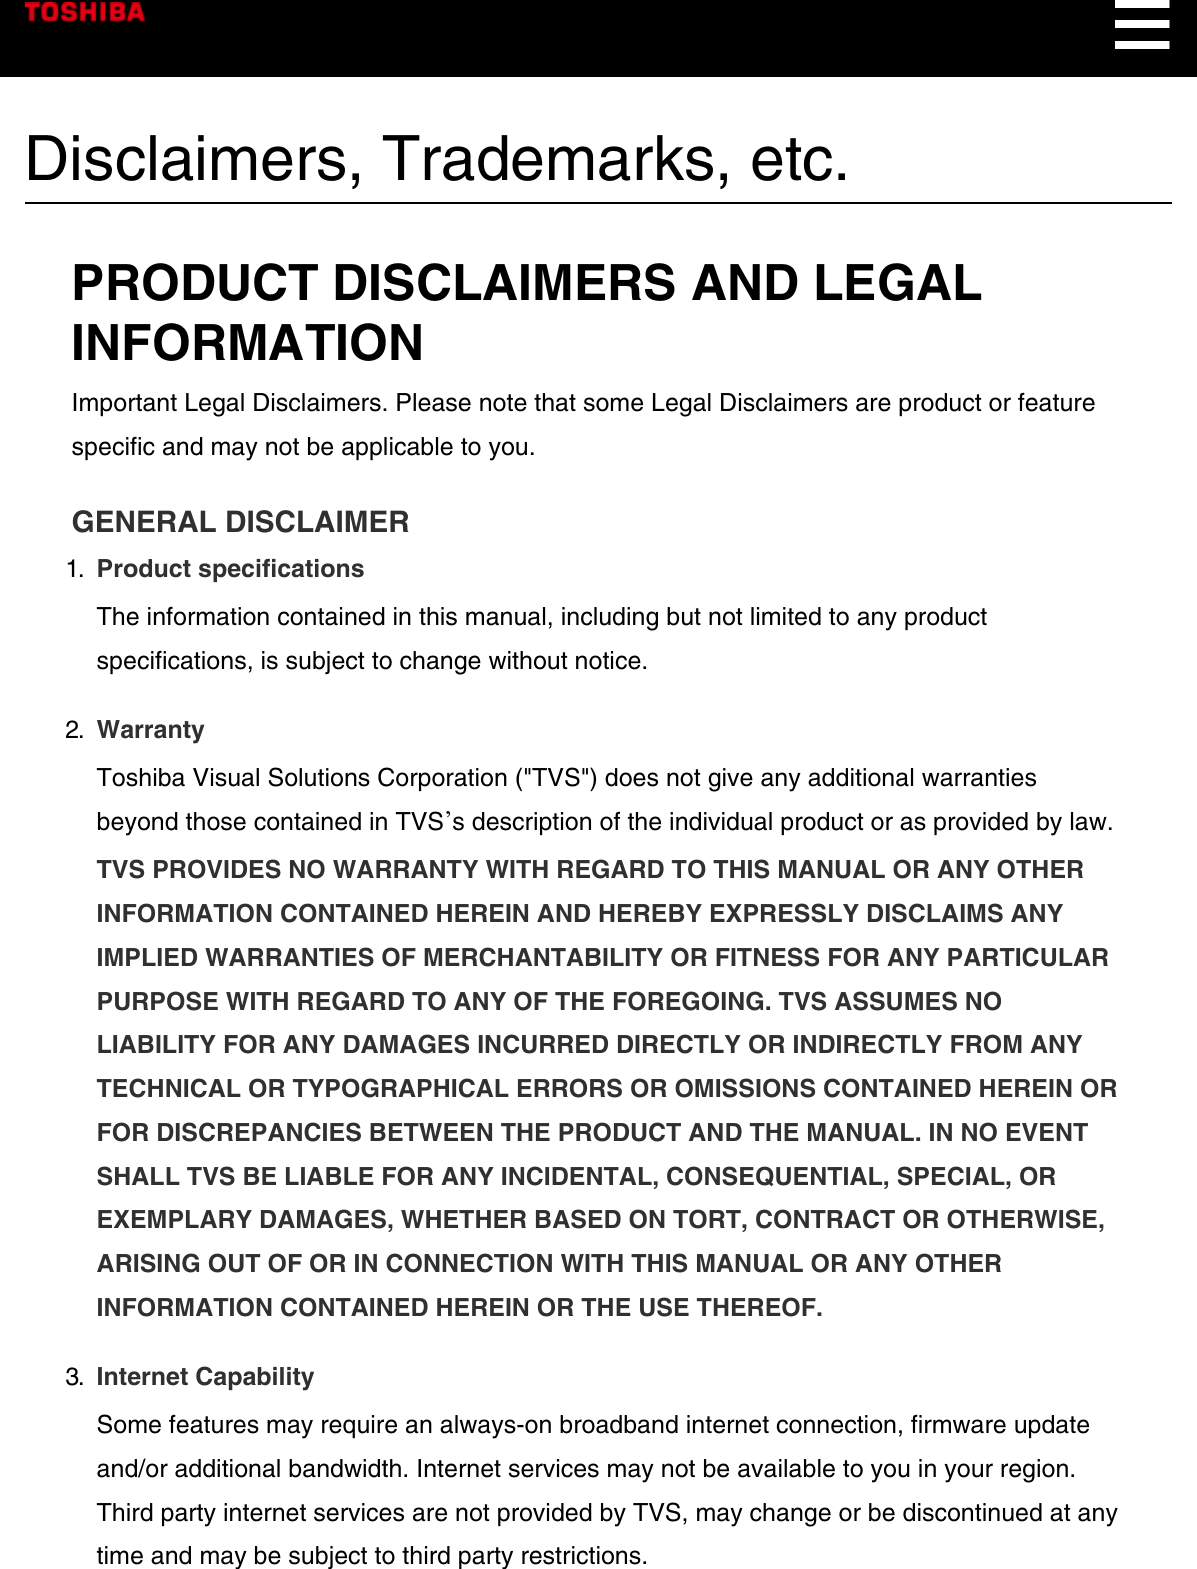 Disclaimers, Trademarks, etc.PRODUCT DISCLAIMERS AND LEGALINFORMATIONImportant Legal Disclaimers. Please note that some Legal Disclaimers are product or featurespecific and may not be applicable to you.GENERAL DISCLAIMER1.  Product specificationsThe information contained in this manual, including but not limited to any productspecifications, is subject to change without notice.2.  WarrantyToshiba Visual Solutions Corporation (&quot;TVS&quot;) does not give any additional warrantiesbeyond those contained in TVSʼs description of the individual product or as provided by law.TVS PROVIDES NO WARRANTY WITH REGARD TO THIS MANUAL OR ANY OTHERINFORMATION CONTAINED HEREIN AND HEREBY EXPRESSLY DISCLAIMS ANYIMPLIED WARRANTIES OF MERCHANTABILITY OR FITNESS FOR ANY PARTICULARPURPOSE WITH REGARD TO ANY OF THE FOREGOING. TVS ASSUMES NOLIABILITY FOR ANY DAMAGES INCURRED DIRECTLY OR INDIRECTLY FROM ANYTECHNICAL OR TYPOGRAPHICAL ERRORS OR OMISSIONS CONTAINED HEREIN ORFOR DISCREPANCIES BETWEEN THE PRODUCT AND THE MANUAL. IN NO EVENTSHALL TVS BE LIABLE FOR ANY INCIDENTAL, CONSEQUENTIAL, SPECIAL, OREXEMPLARY DAMAGES, WHETHER BASED ON TORT, CONTRACT OR OTHERWISE,ARISING OUT OF OR IN CONNECTION WITH THIS MANUAL OR ANY OTHERINFORMATION CONTAINED HEREIN OR THE USE THEREOF.3.  Internet CapabilitySome features may require an always-on broadband internet connection, firmware updateand/or additional bandwidth. Internet services may not be available to you in your region.Third party internet services are not provided by TVS, may change or be discontinued at anytime and may be subject to third party restrictions.